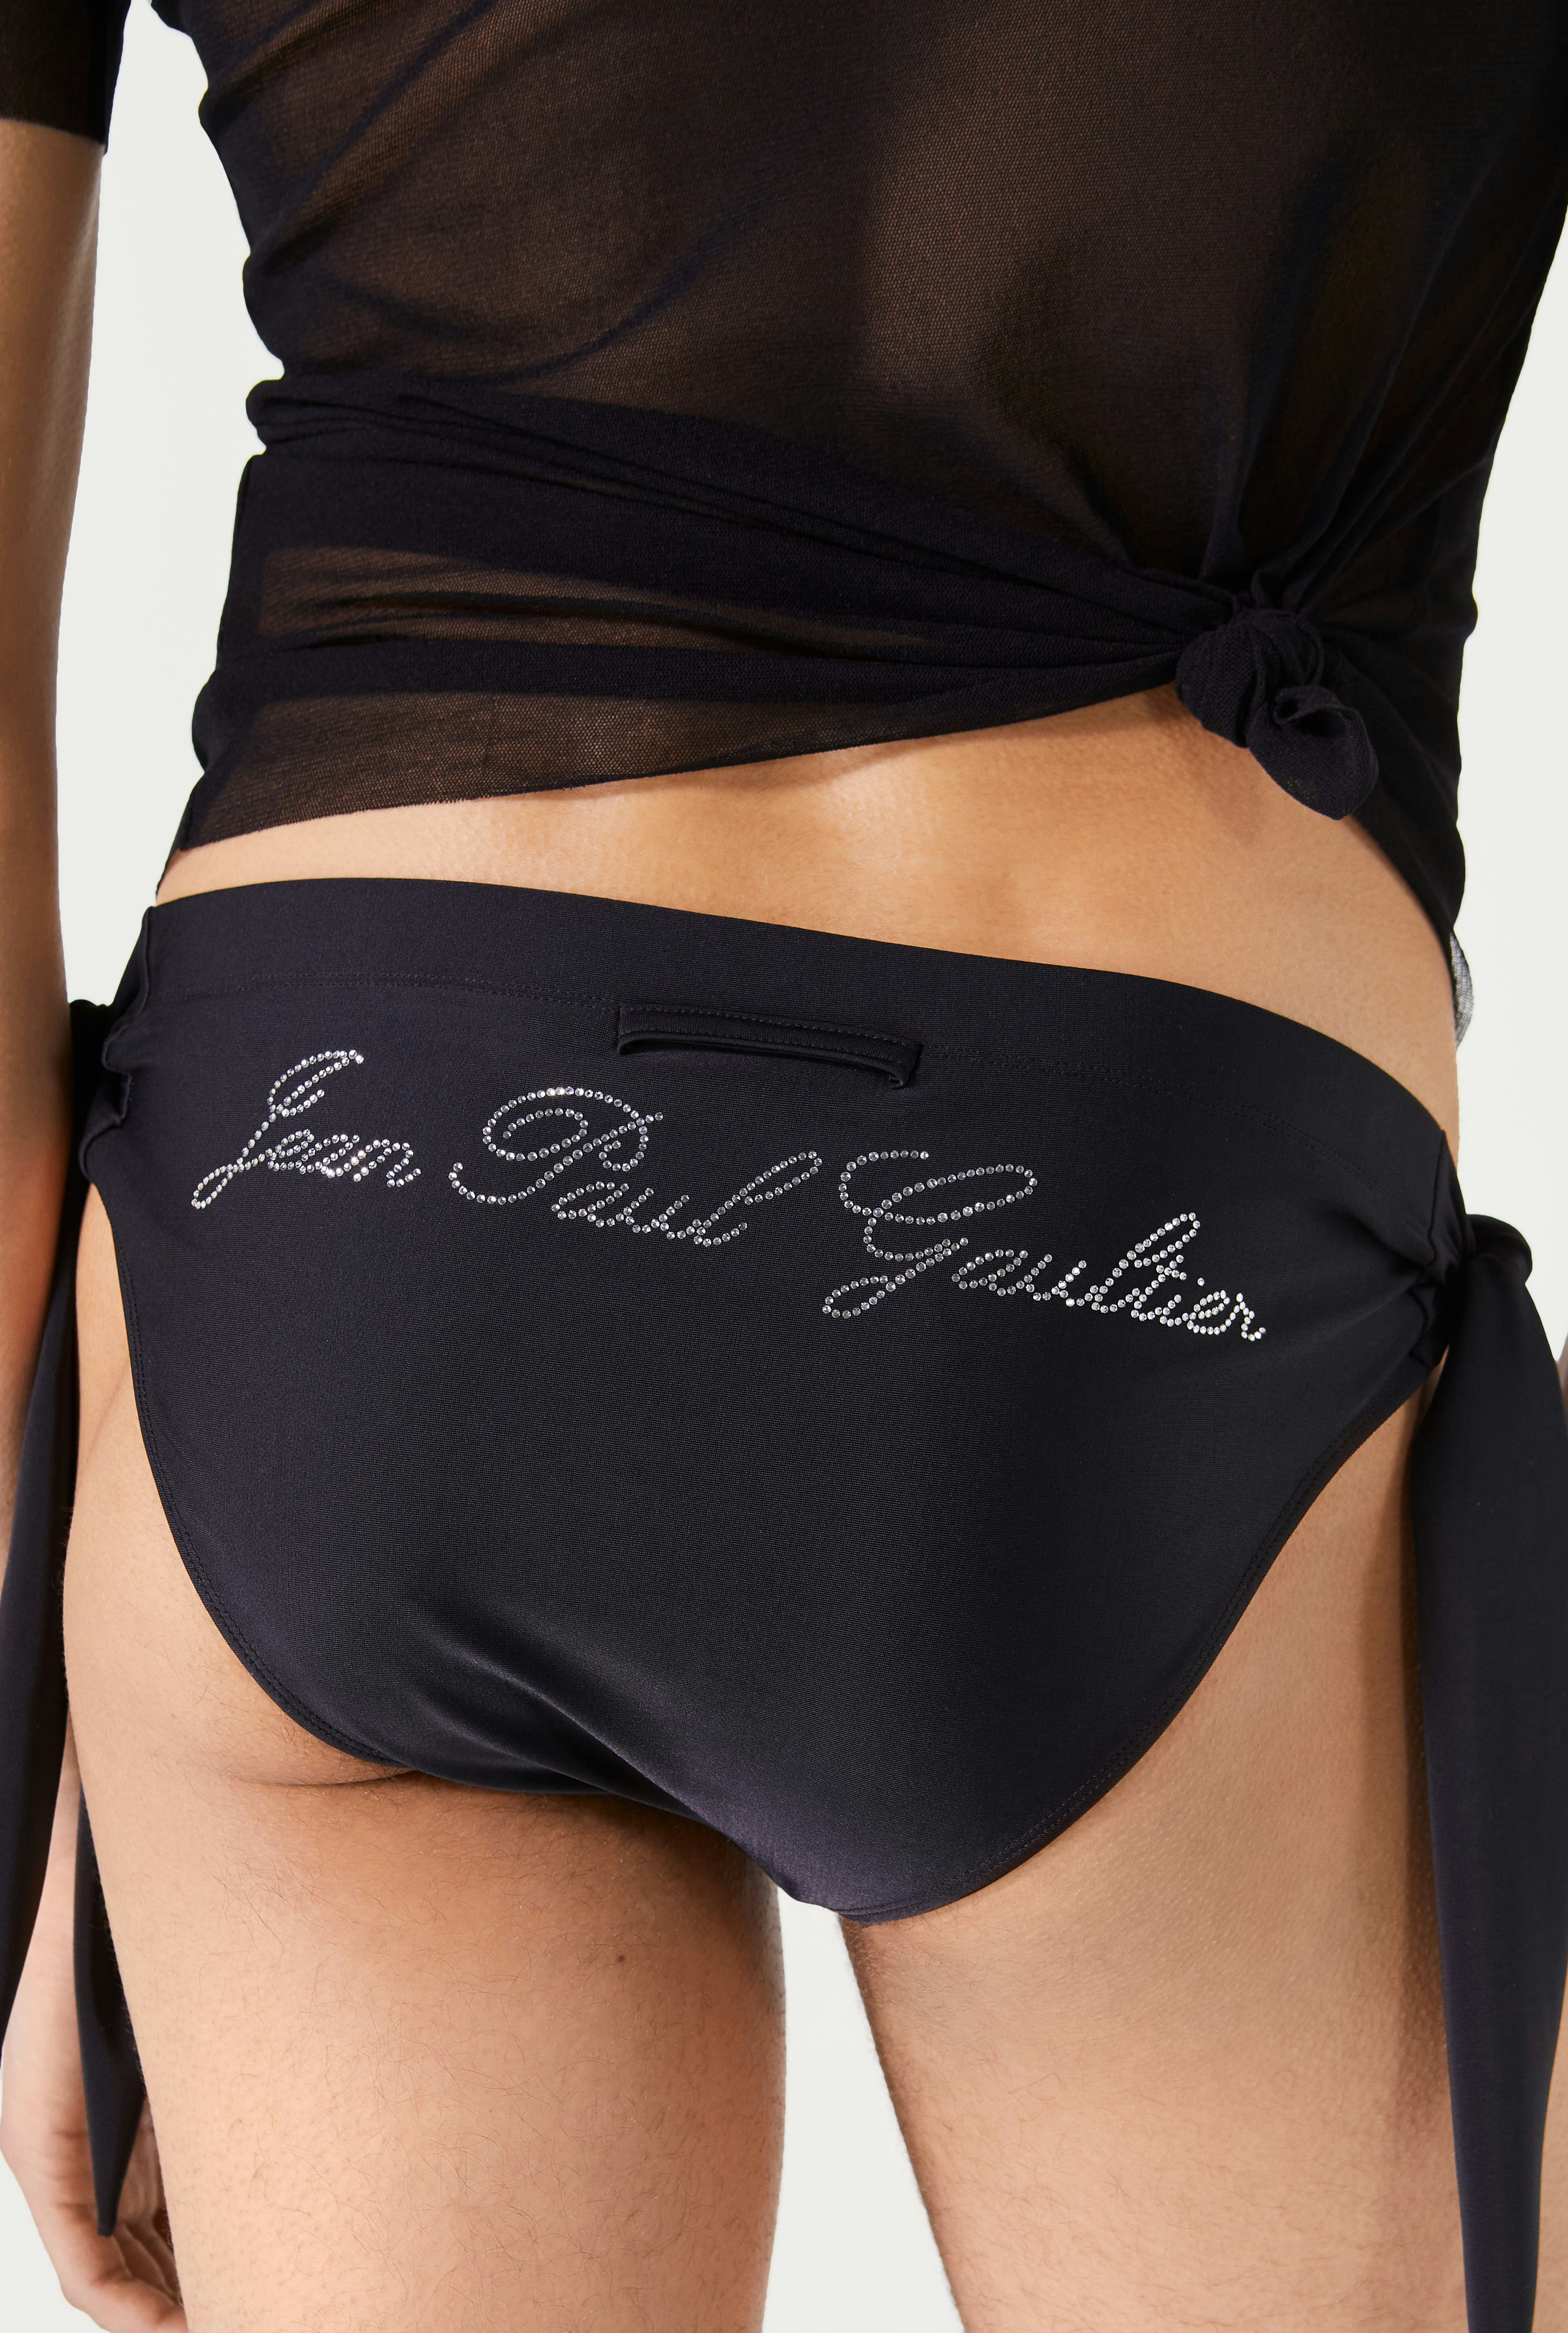 The Black Jean Paul Gaultier Swimming Briefs hover